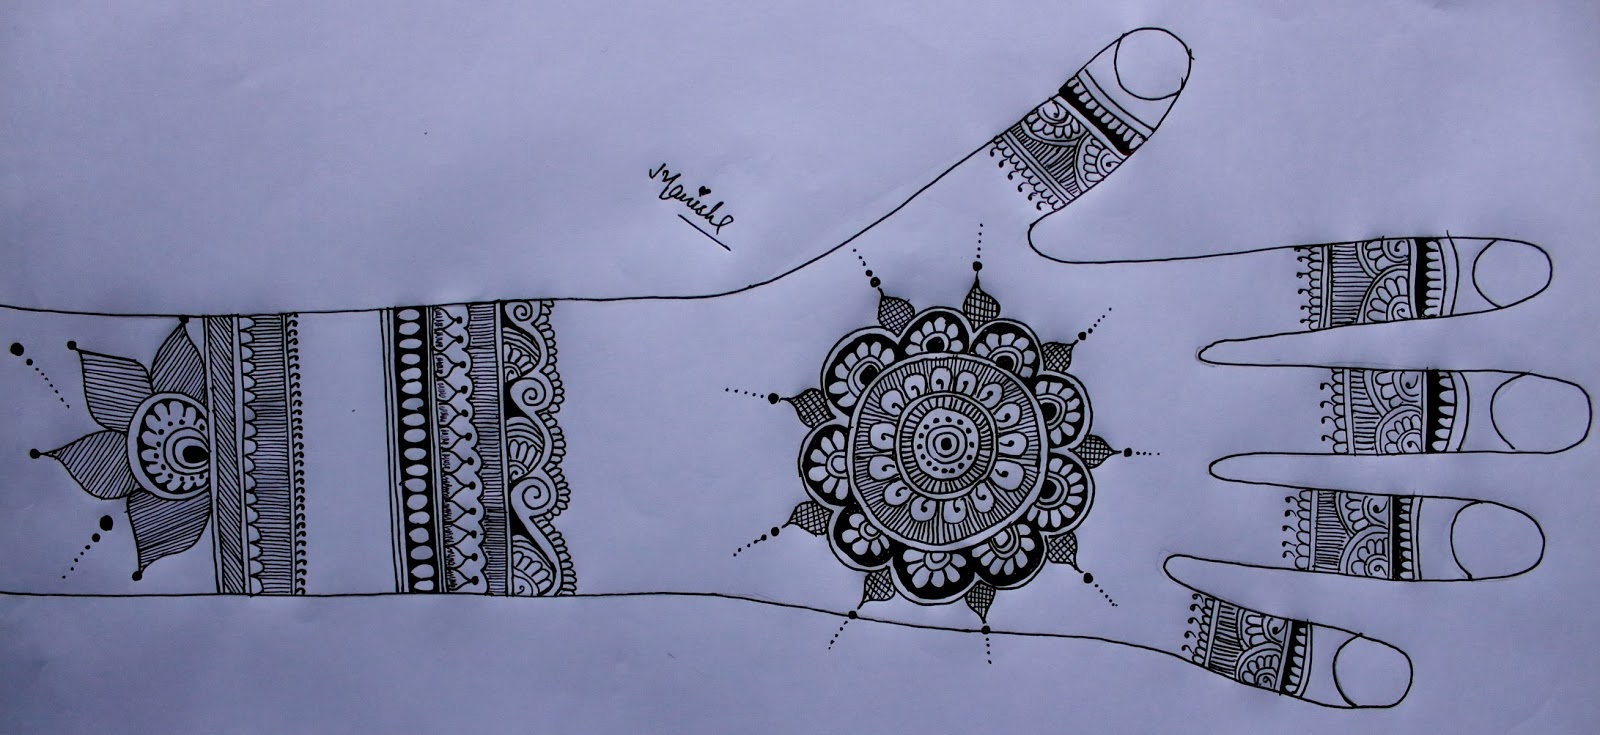 Mehndi Design Sketch At Paintingvalley Com Explore Collection Of Mehndi Design Sketch There are many variety and type of mehndi design. mehndi design sketch at paintingvalley